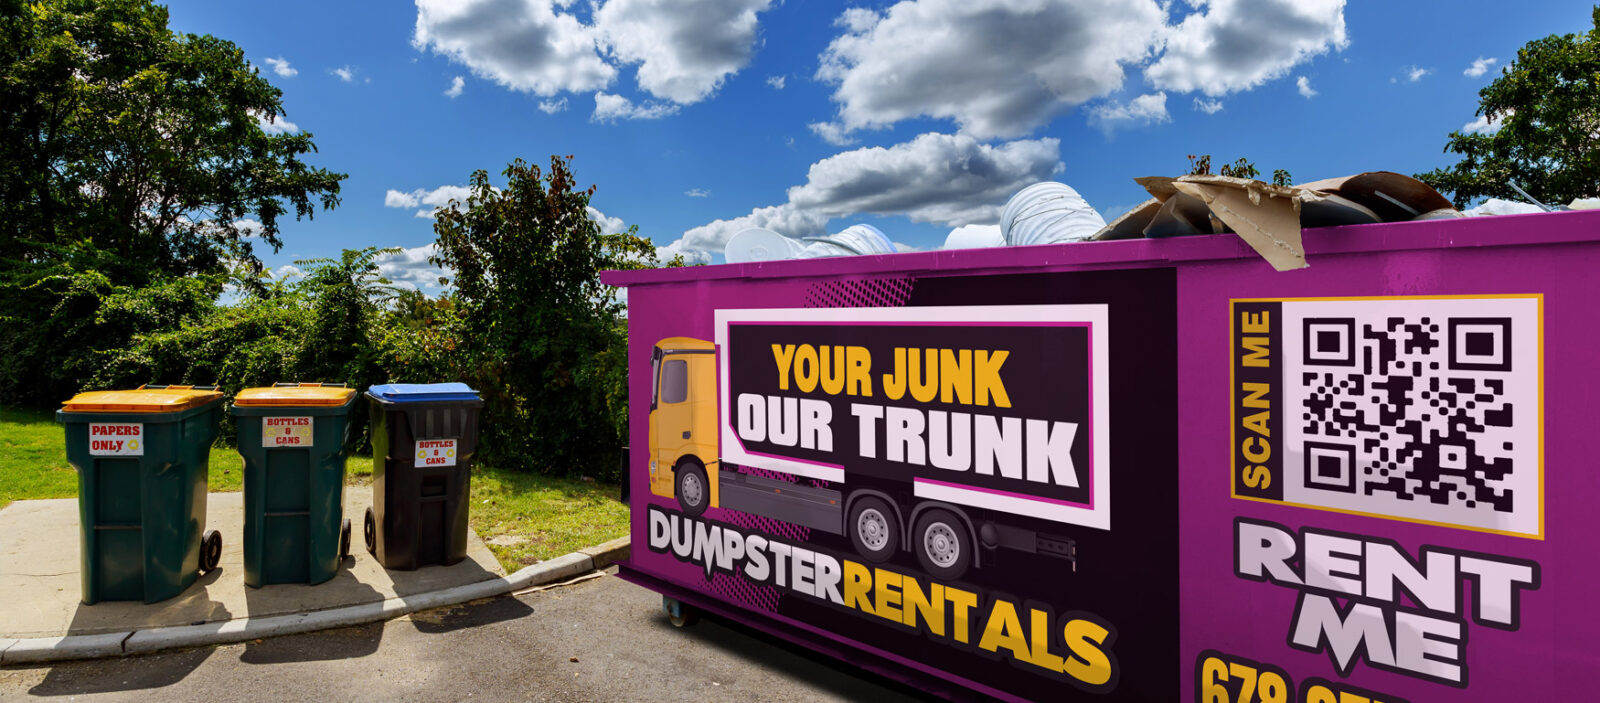 Reliable & Affordable
DUMPSTERS